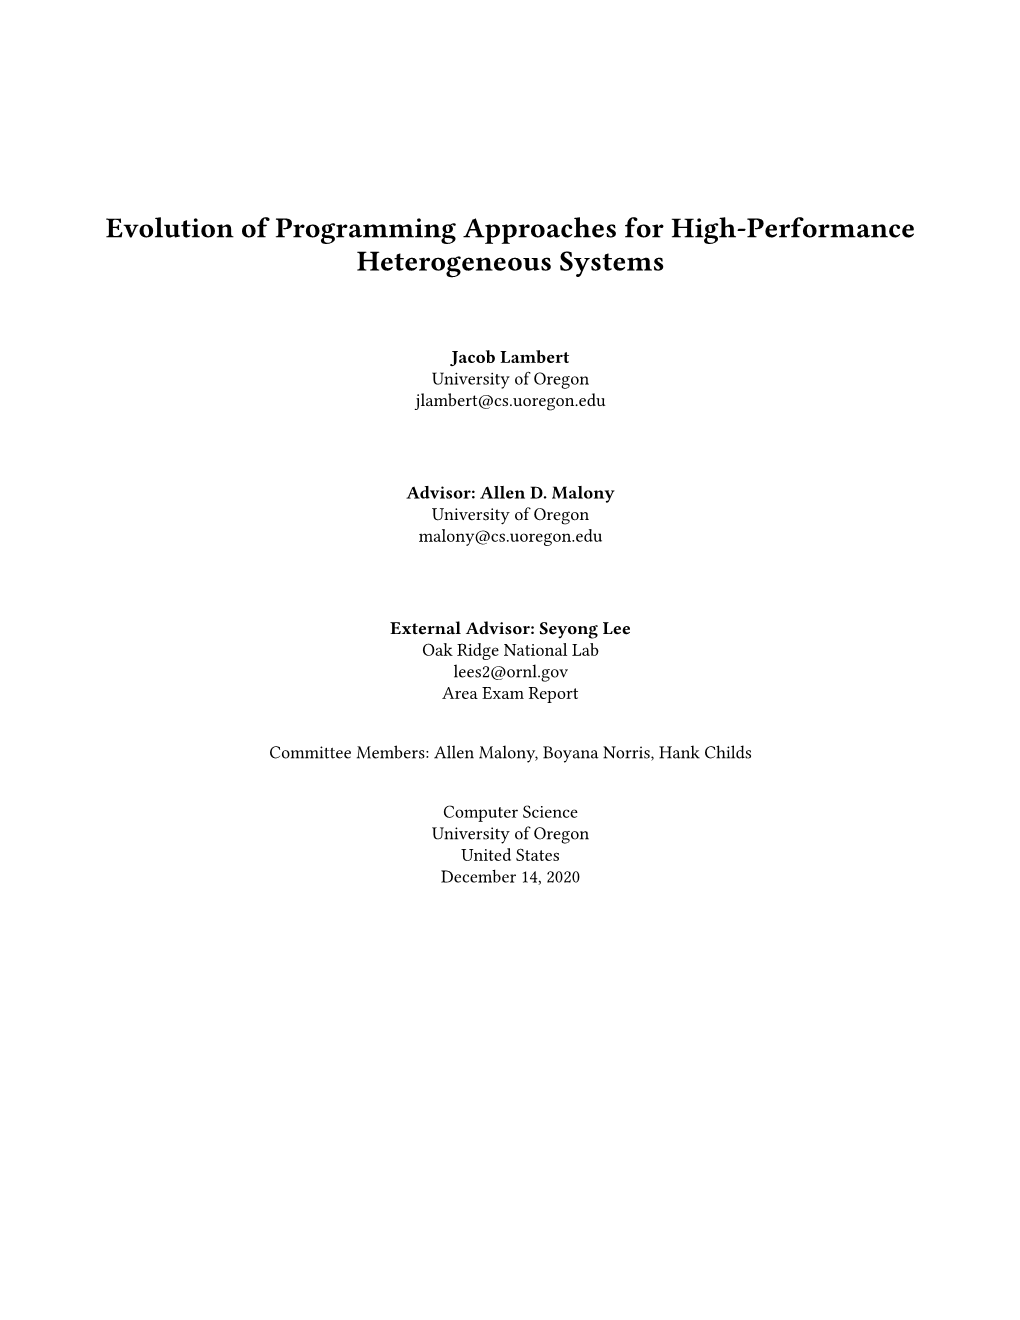 Evolution of Programming Approaches for High-Performance Heterogeneous Systems